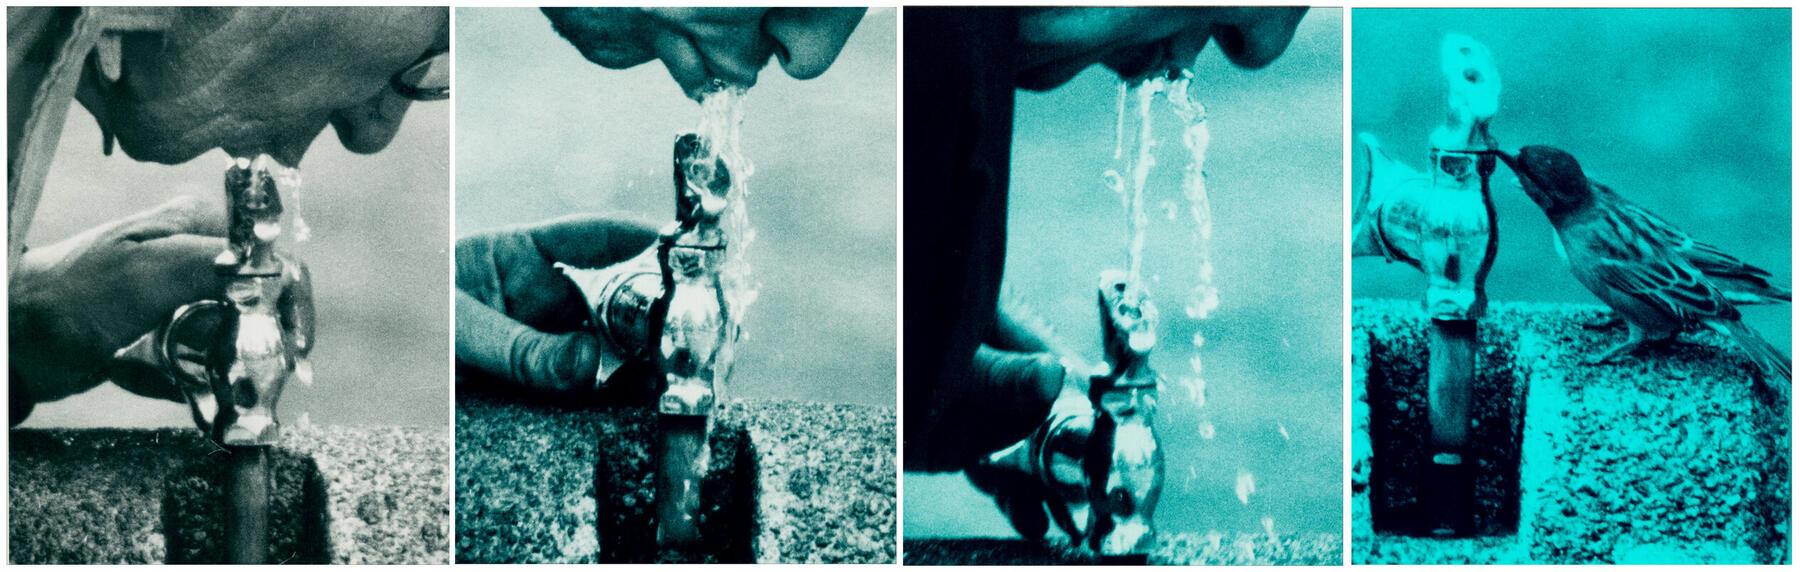 People sequentially drink from a water fountain in a series of three black and white images that turn blue as you move to the right, finally ending on a photo of a bird drinking from a fountain.